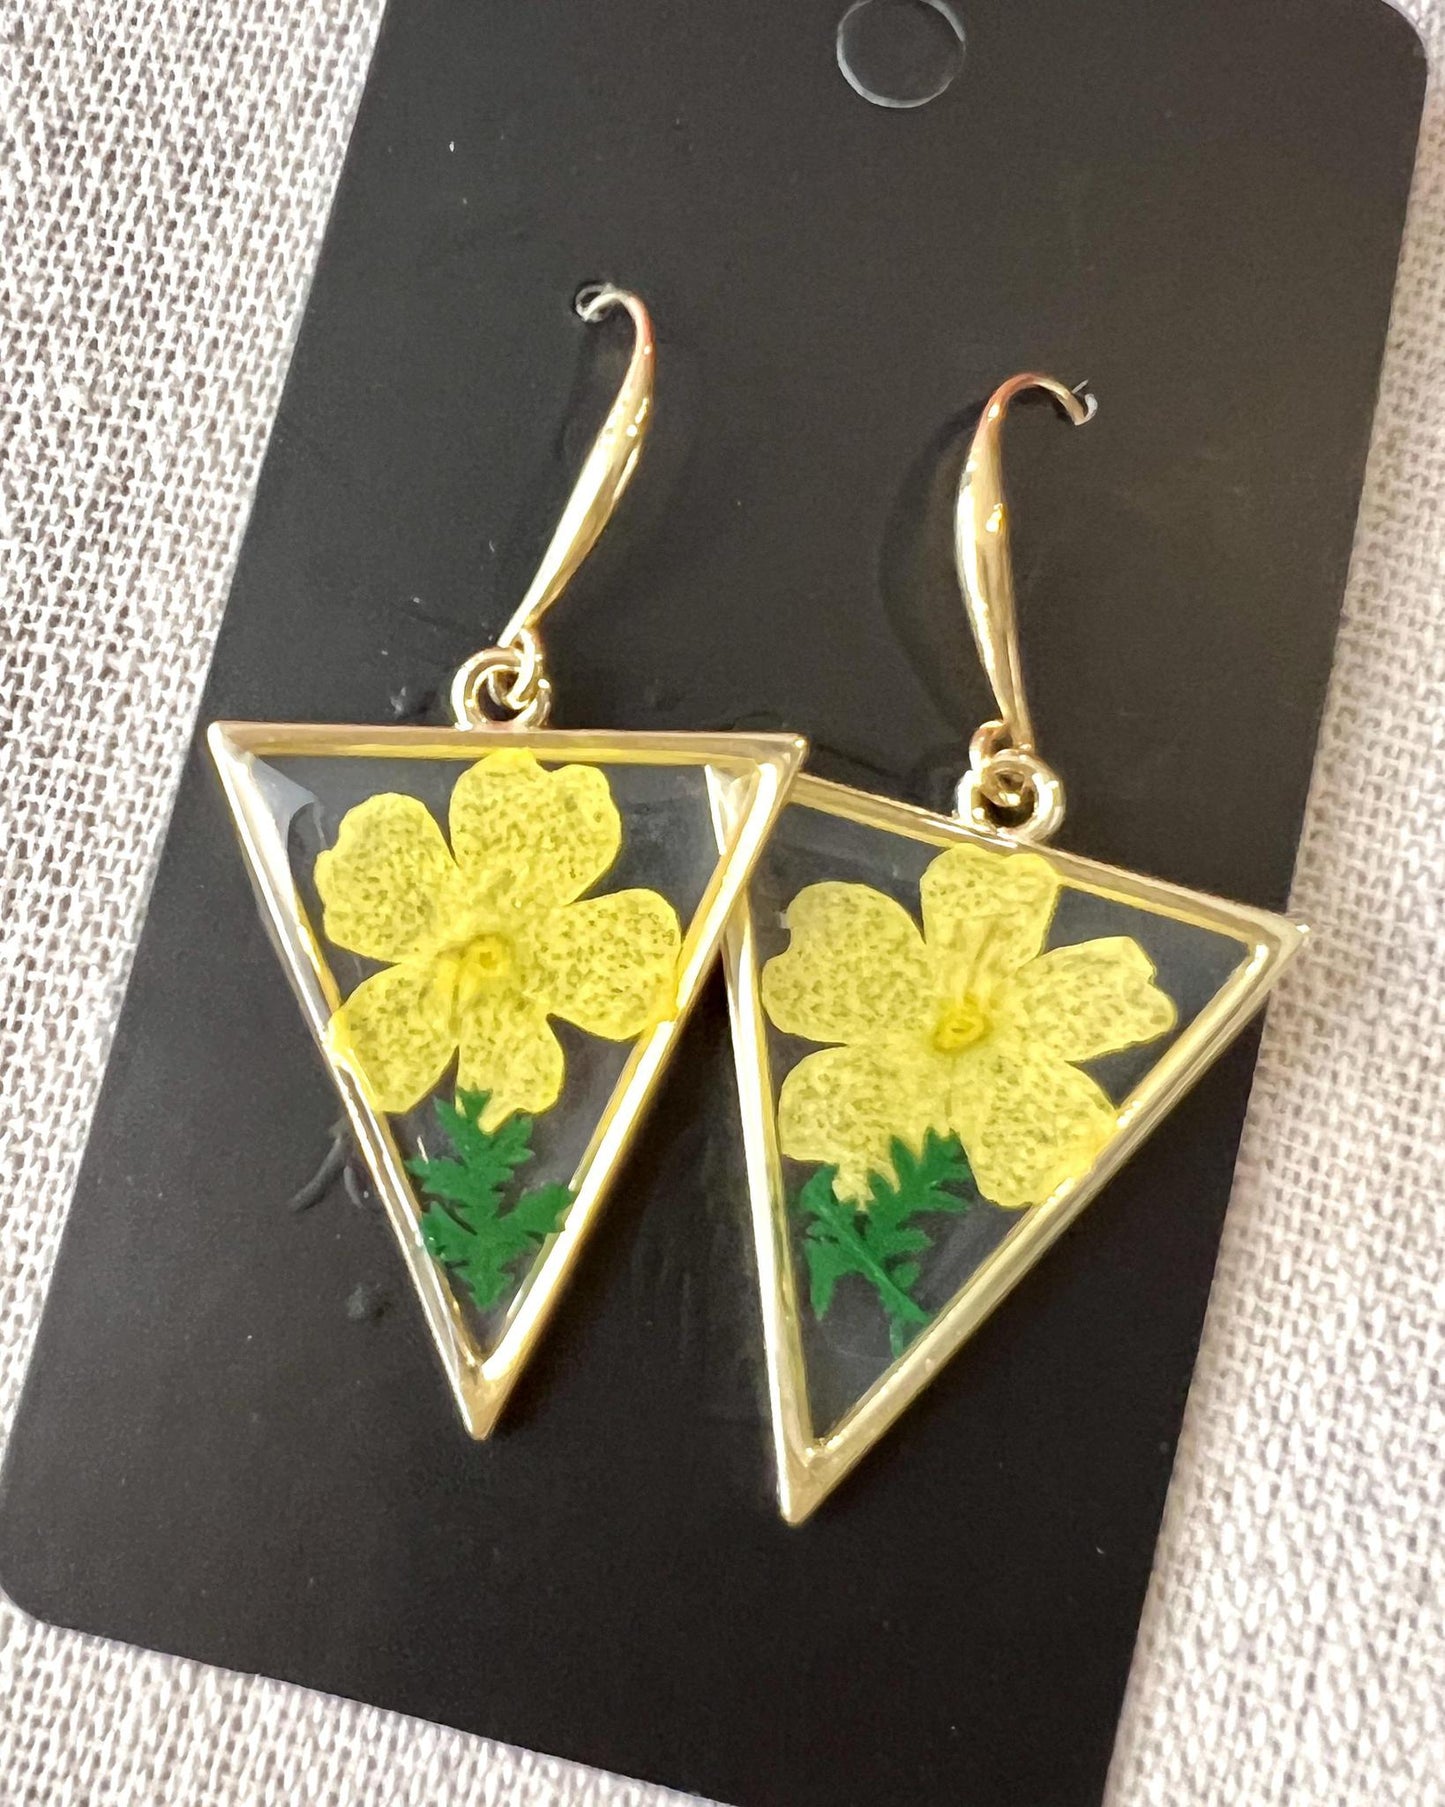 Pajaro Negro 24k Gold Fill Upside Down Triangle Earrings with Yellow Flower